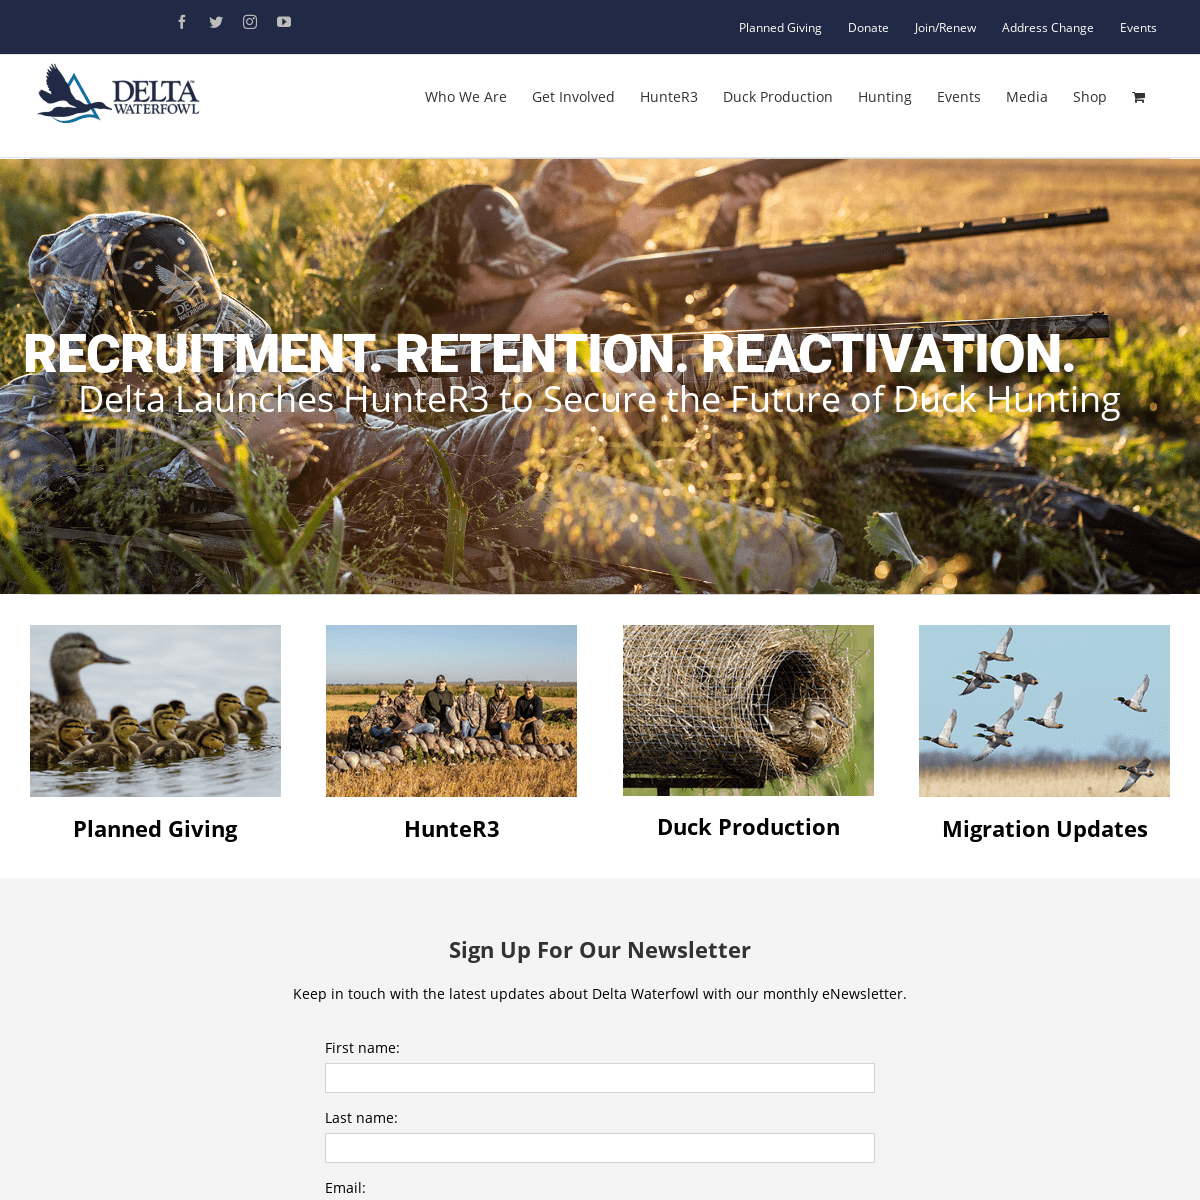 A complete backup of deltawaterfowl.org